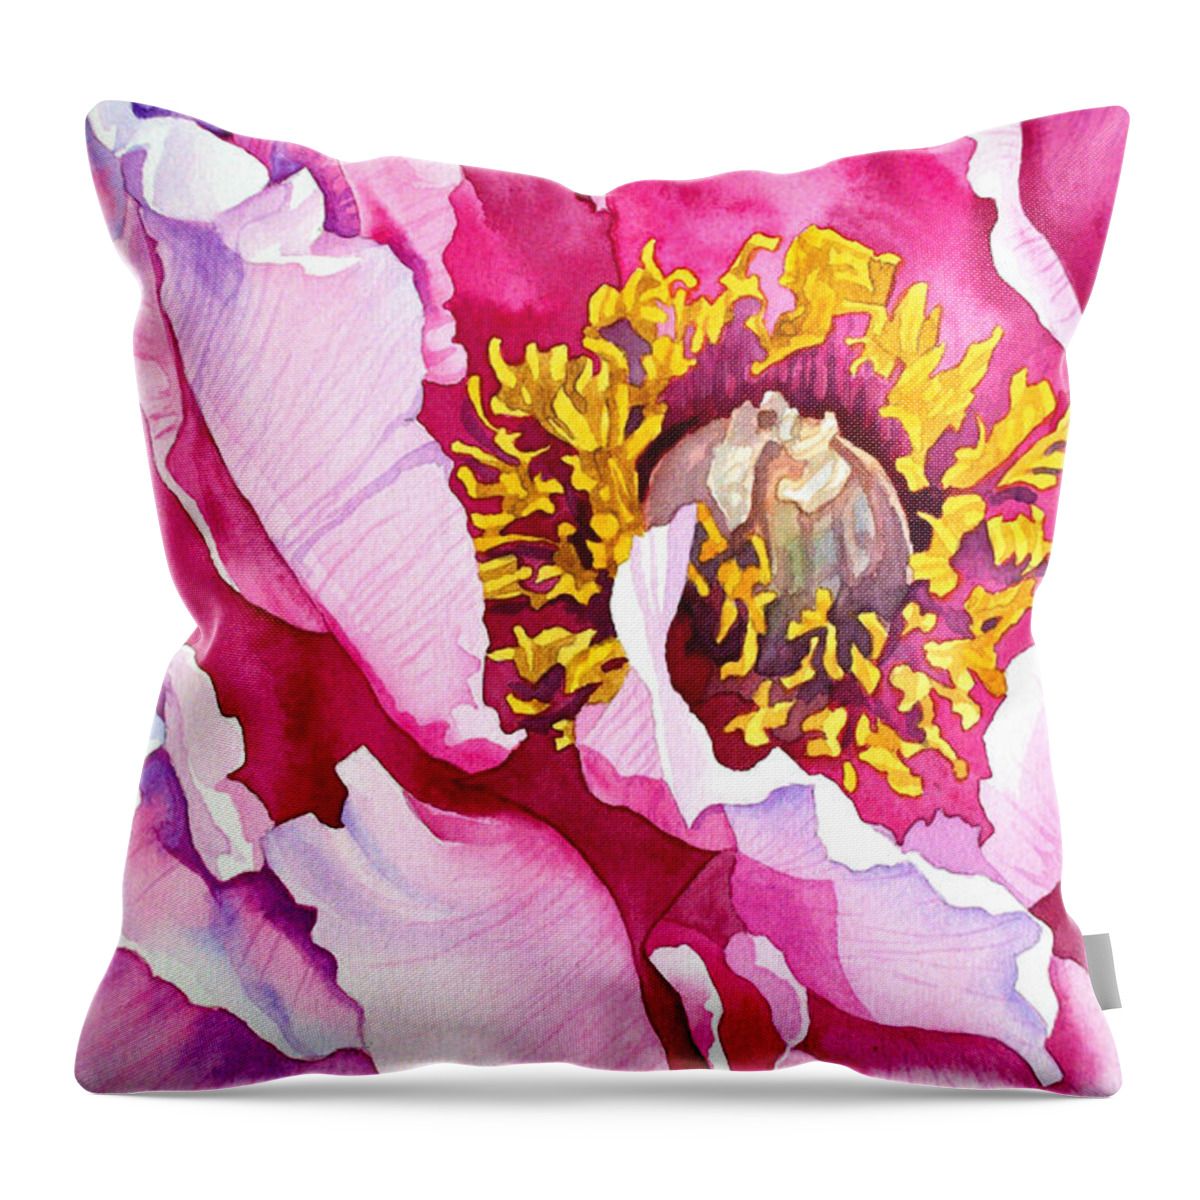 Peony Throw Pillow featuring the painting Peony by Espero Art